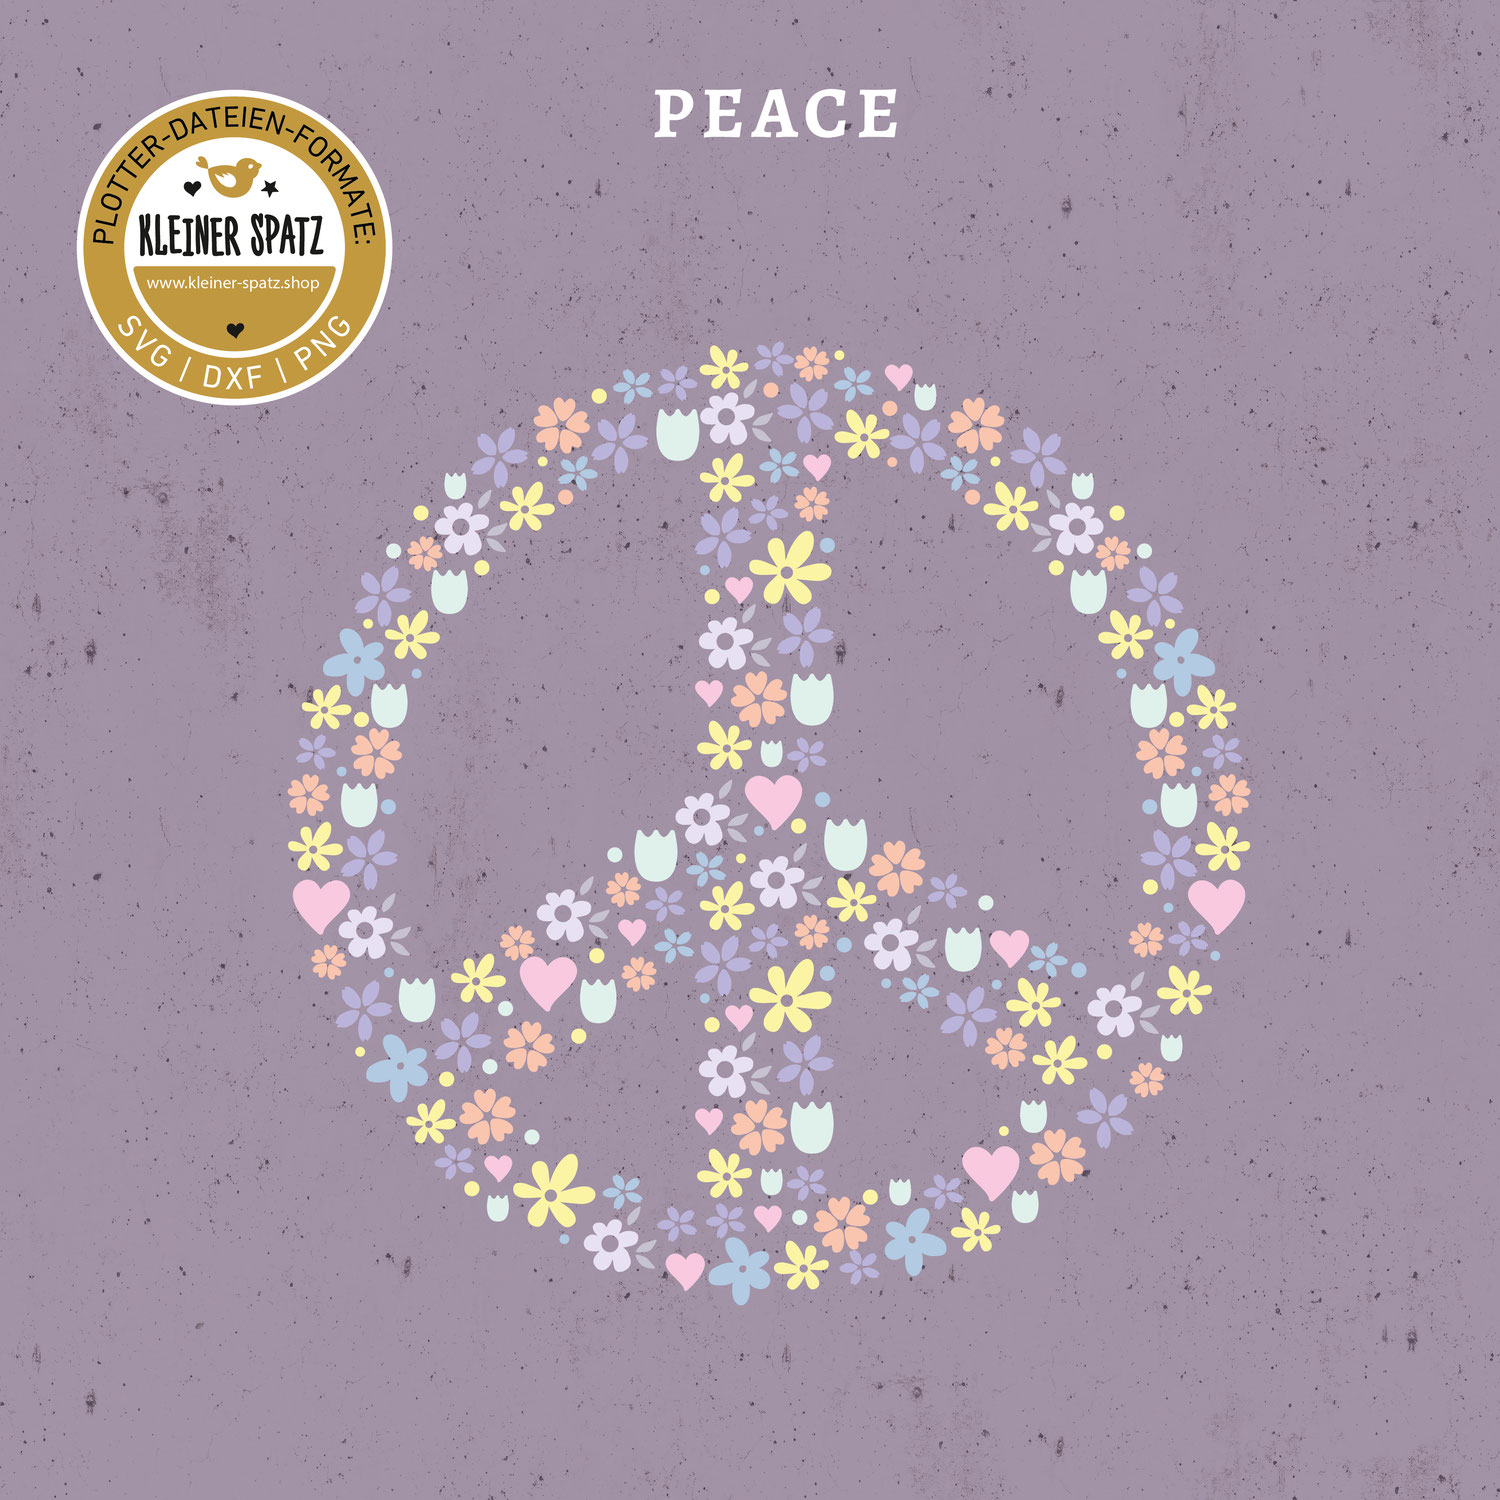 Let Peace spread the World